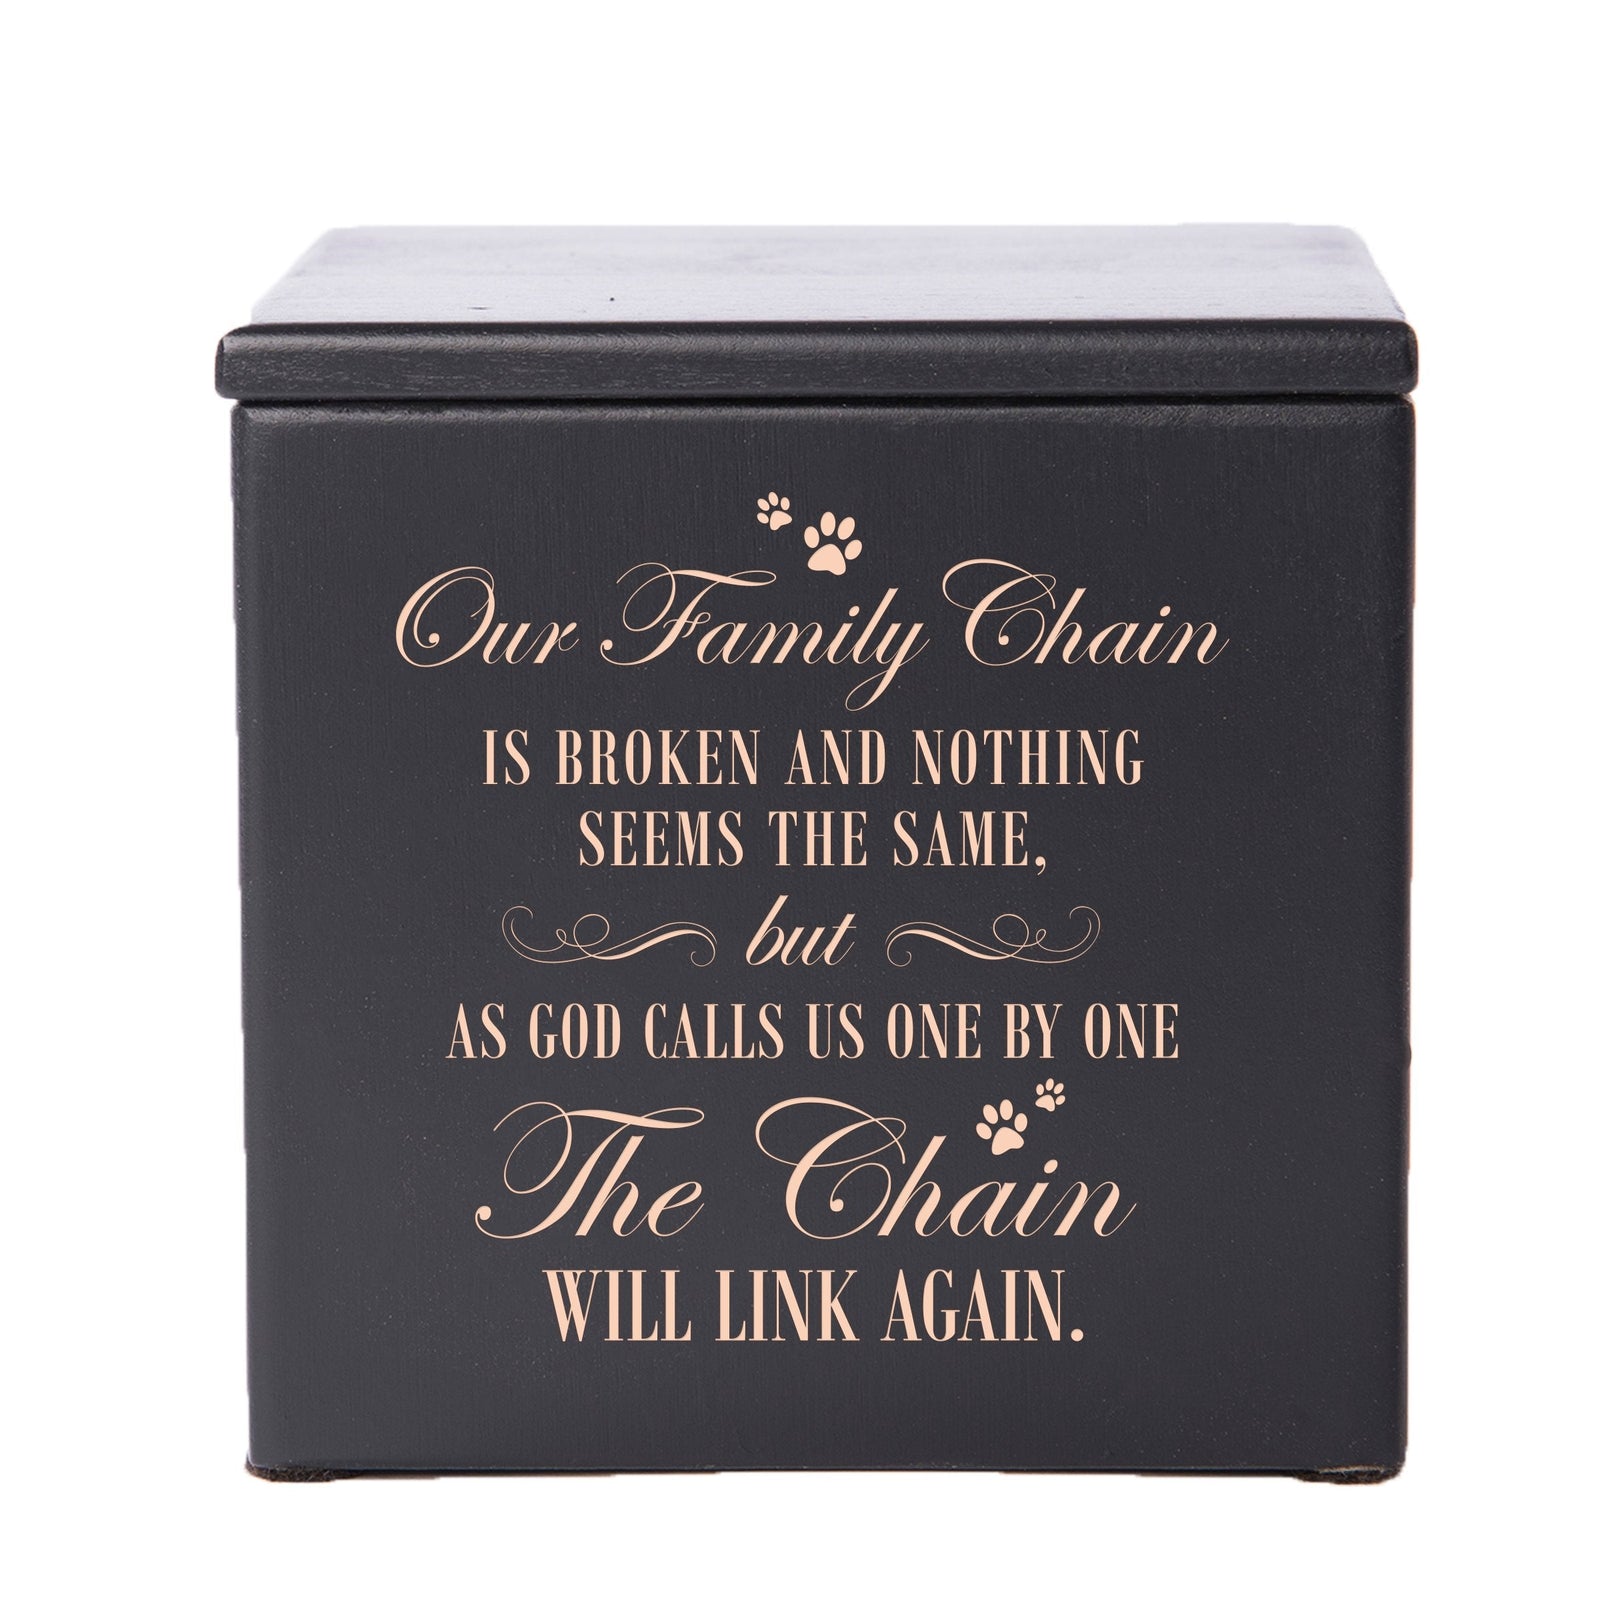 Black Pet Memorial 3.5x3.5 Keepsake Urn with phrase "Our Family Chain"